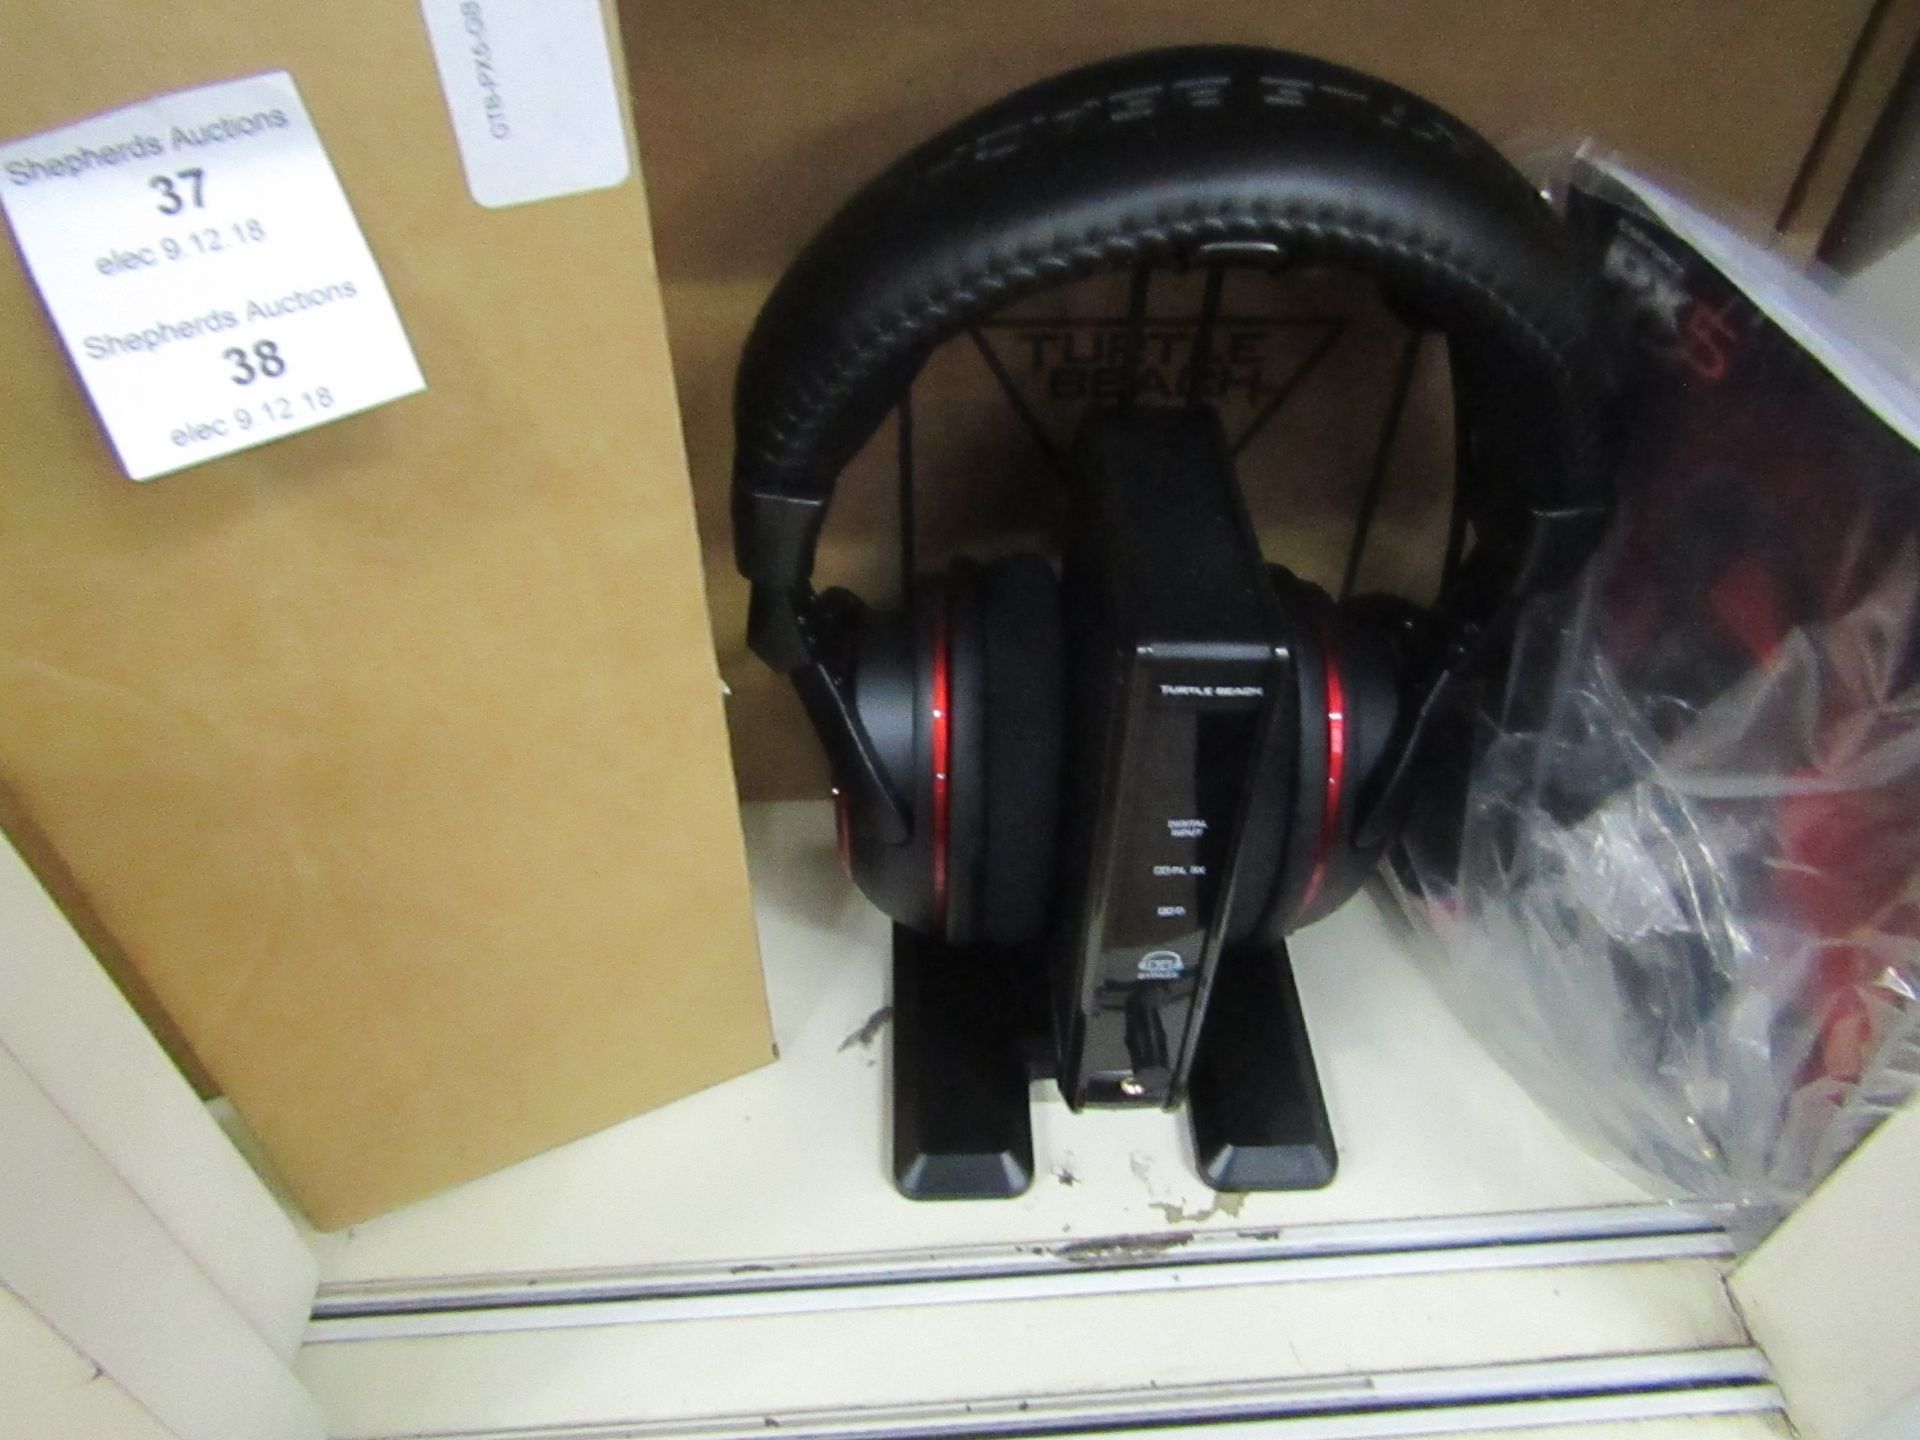 Turtle Beach PX5 gaming headset, tested working and boxed. RRP £124.99